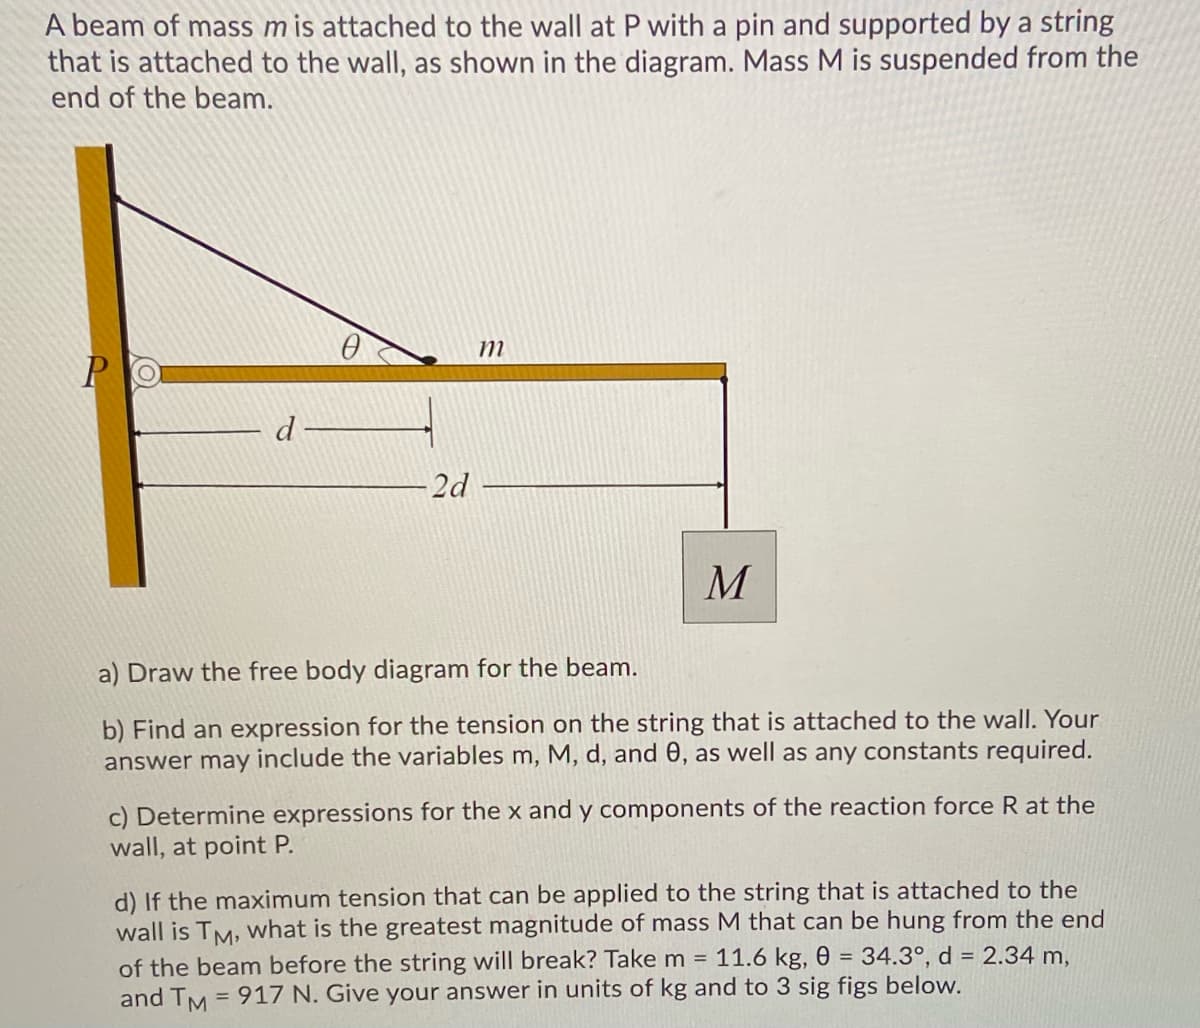 A beam of mass mis attached to the wall at P with a pin and supported by a string
that is attached to the wall, as shown in the diagram. Mass M is suspended from the
end of the beam.
PO
d
2d
a) Draw the free body diagram for the beam.
b) Find an expression for the tension on the string that is attached to the wall. Your
answer may include the variables m, M, d, and 0, as well as any constants required.
c) Determine expressions for the x and y components of the reaction force R at the
wall, at point P.
d) If the maximum tension that can be applied to the string that is attached to the
wall is TM, What is the greatest magnitude of mass M that can be hung from the end
of the beam before the string will break? Take m = 11.6 kg, 0 = 34.3°, d = 2.34 m,
and TM = 917 N. Give your answer in units of kg and to 3 sig figs below.
